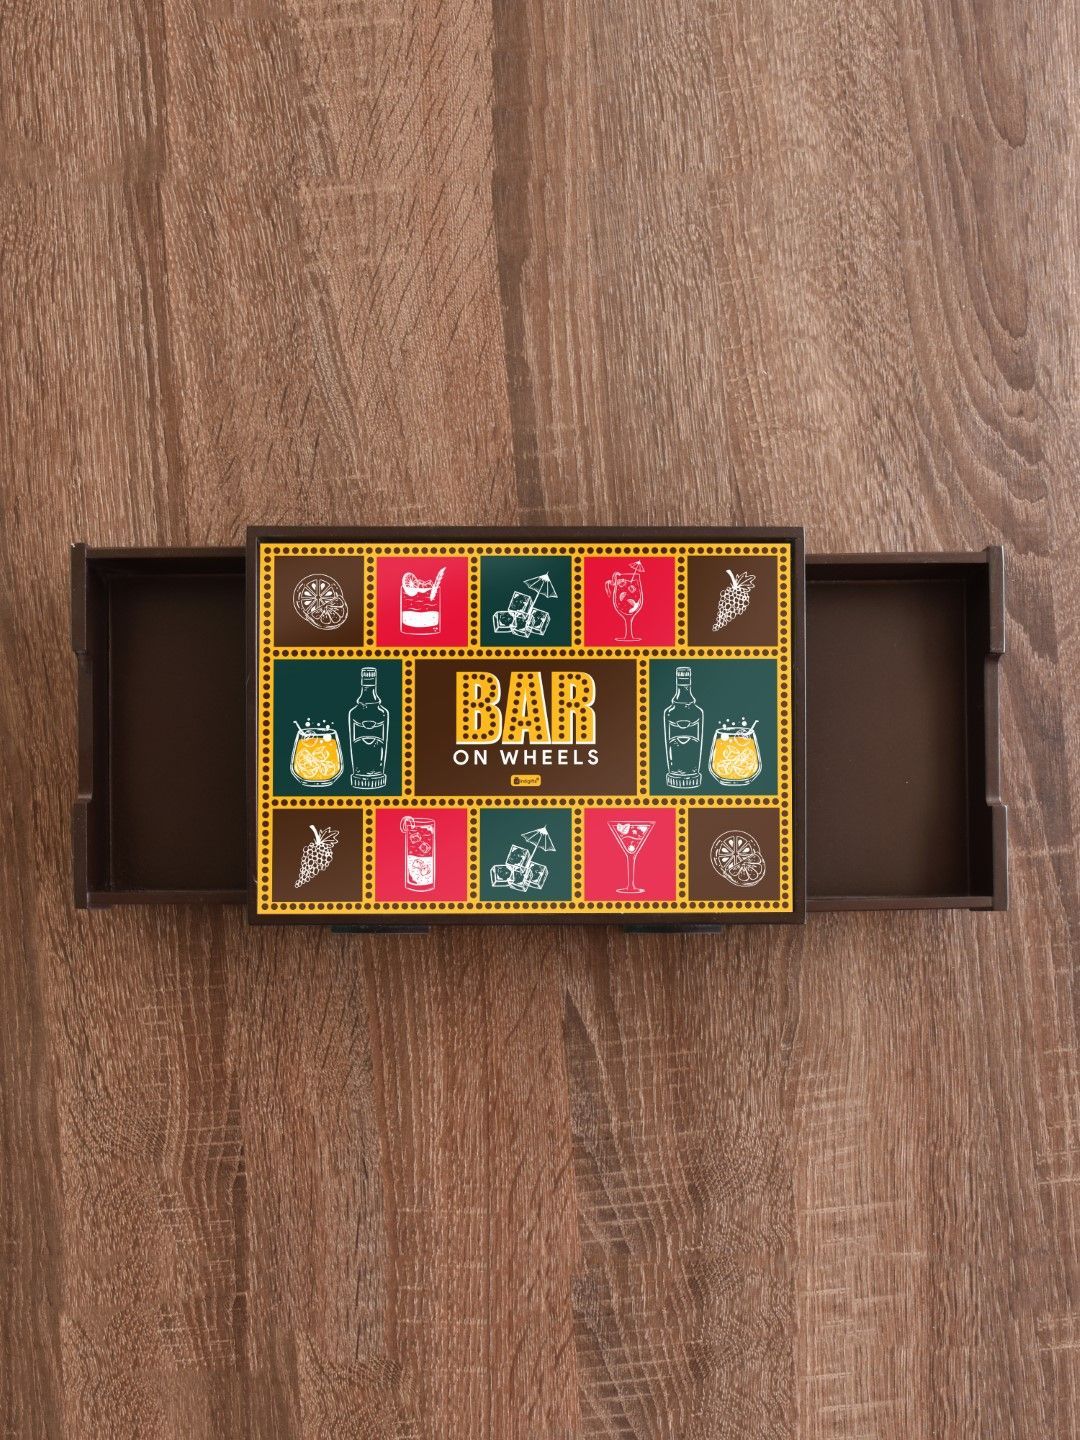 Indigifts Wooden Bar Trolly for Home Bar On Wheels Quotes Printed Bar Trolley – Wooden Bar Trolley| Bar Table Trolley| Bar Tray for Gifts| Serving Bar Tray for Decorations| Gifts Set for Friends